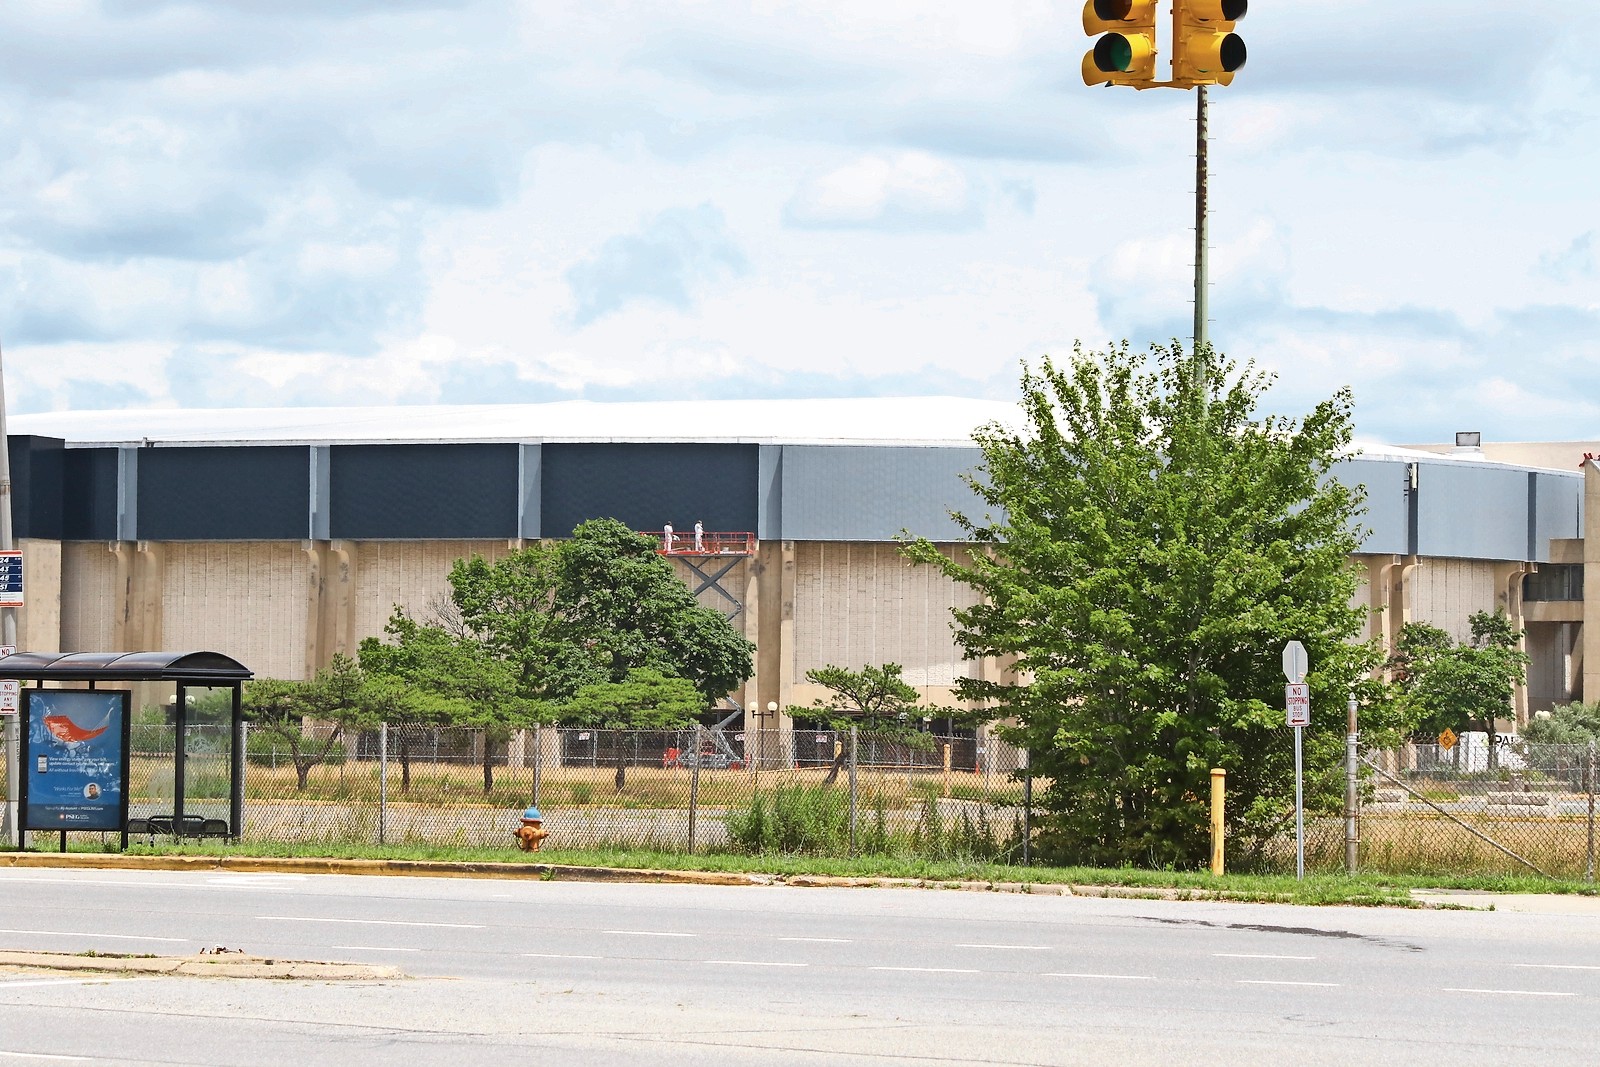 Crews started painting the Coliseum a earlier this month, after preparatory work for the exterior renovation of the Uniondale arena began on June 16.